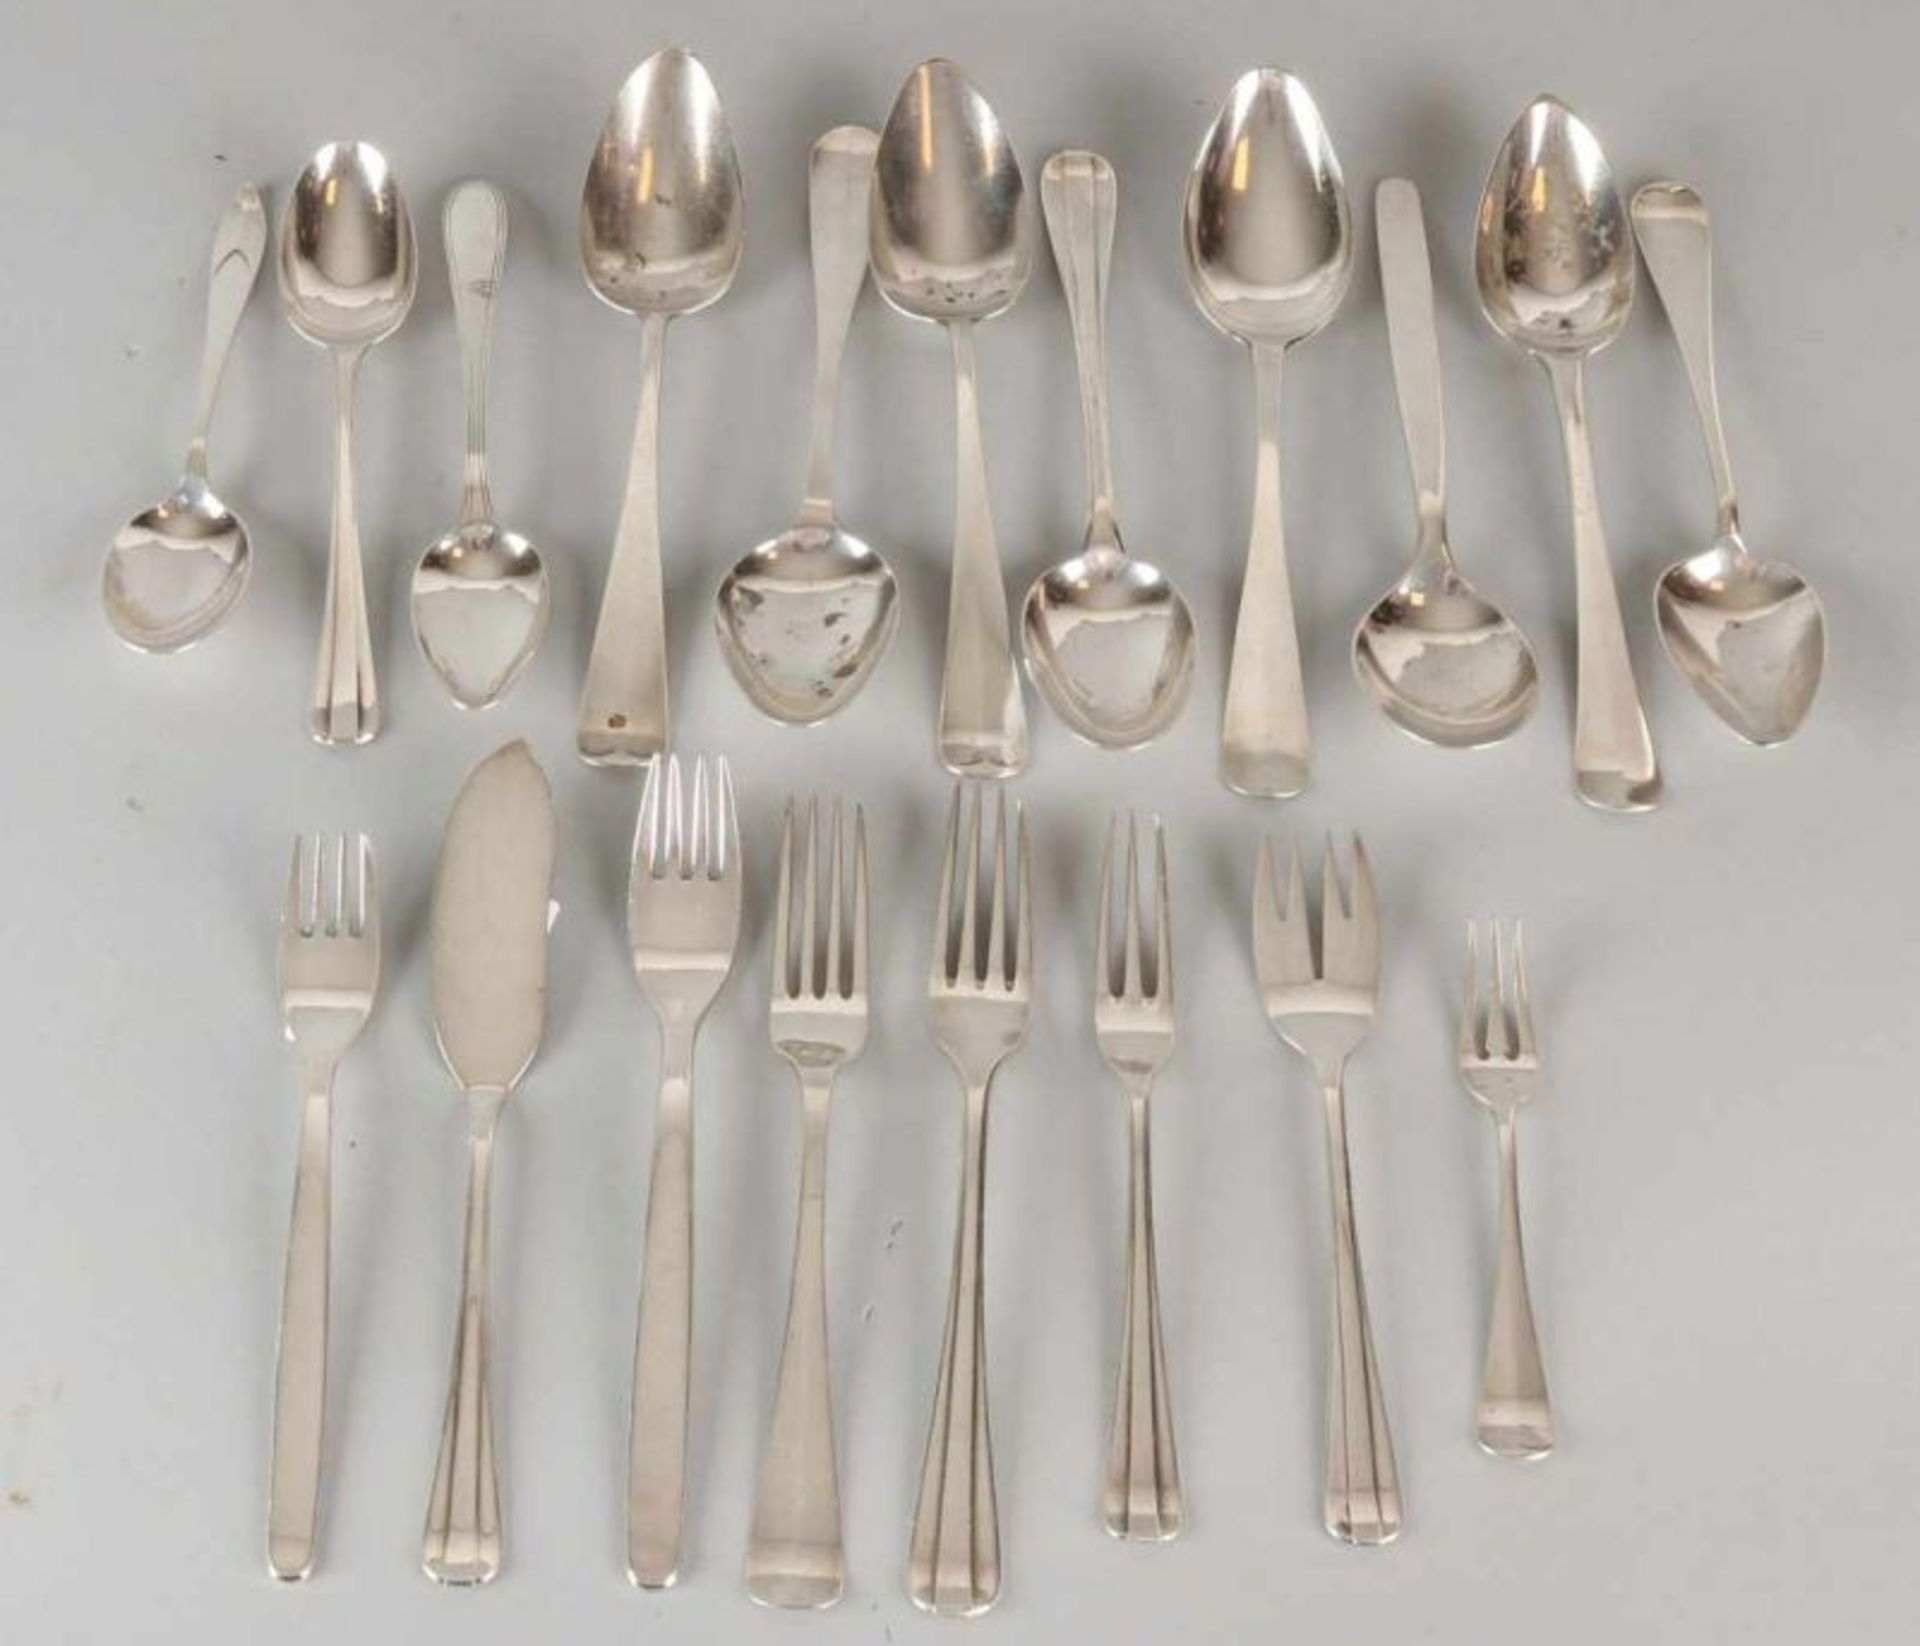 Lot with silver cutlery, 19 parts, various models with different levels. Total approx 943 grams.